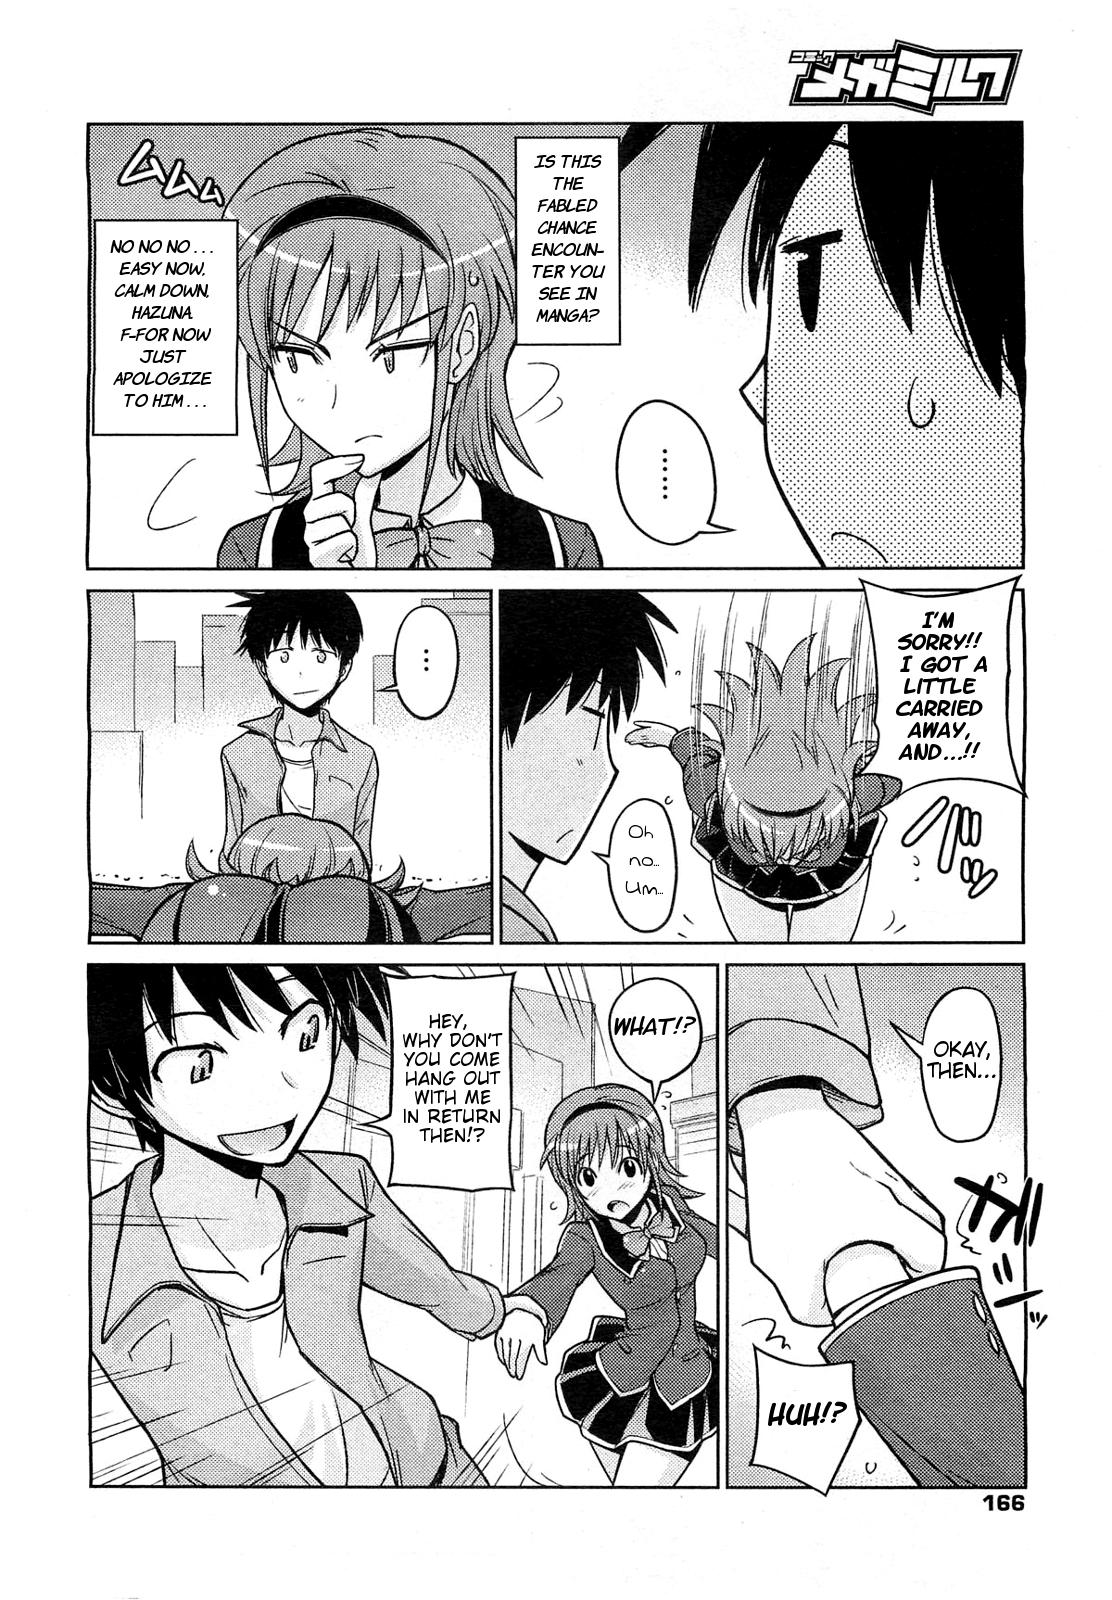 Handjobs [Umiushi] Let's Play With a High School (?) Girl!! [English] =TV+L4K= Doggy Style - Page 4